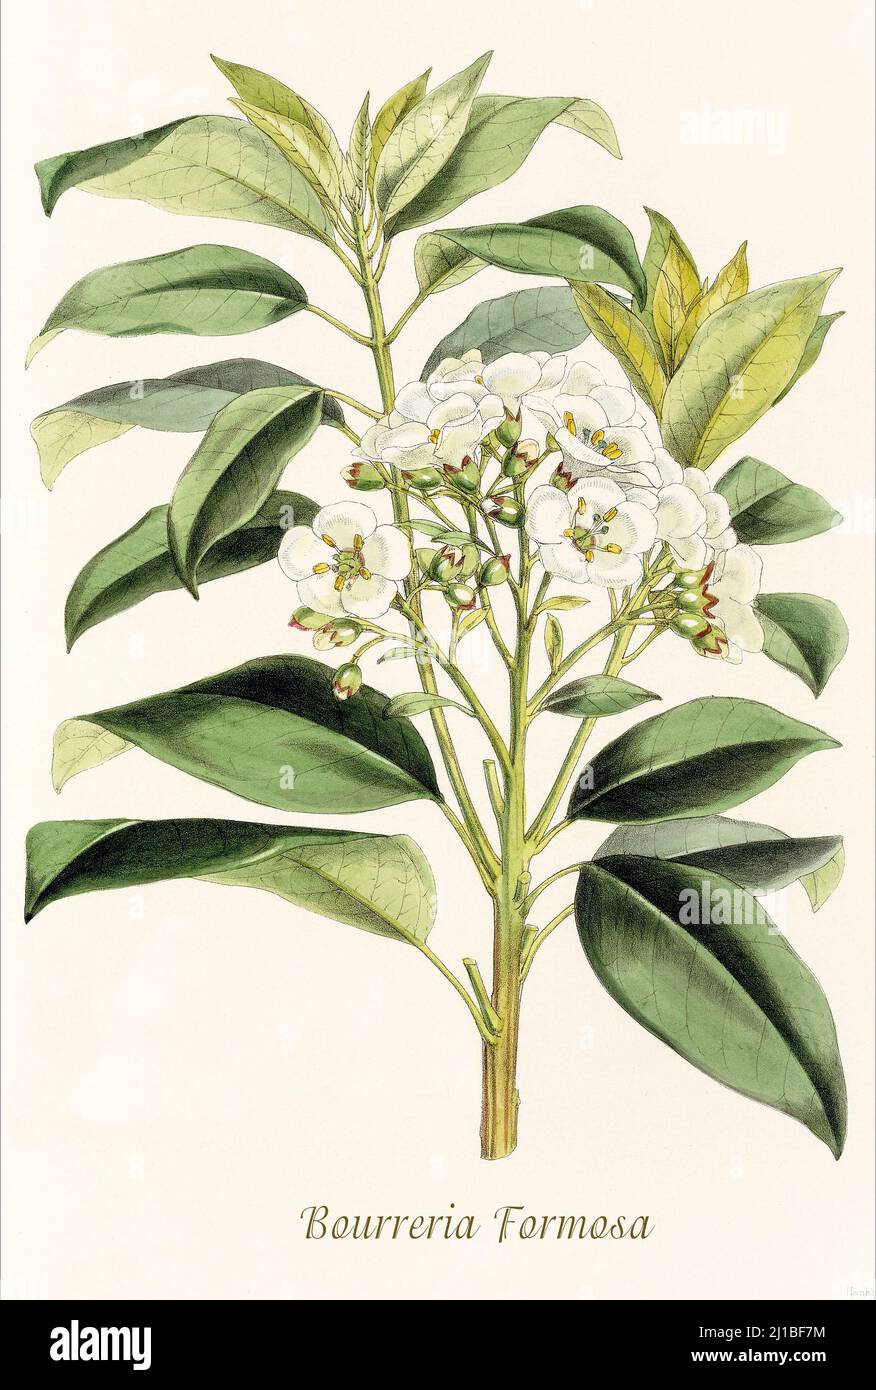 A late 18th century illustration of Bourreria formosa, one of a genus of flowering plants in the borage family, Boraginaceae. Members of the genus are commonly known as strongbark or strongback and are native to the Americas, where species are distributed from Mexico to northern South America, and in the Caribbean and Florida in the United States. From Biologia Centrali-Americana, aka Contributions to the knowledge of the fauna and flora of Mexico and Central America by William Botting. Published in London in 1879. Stock Photo